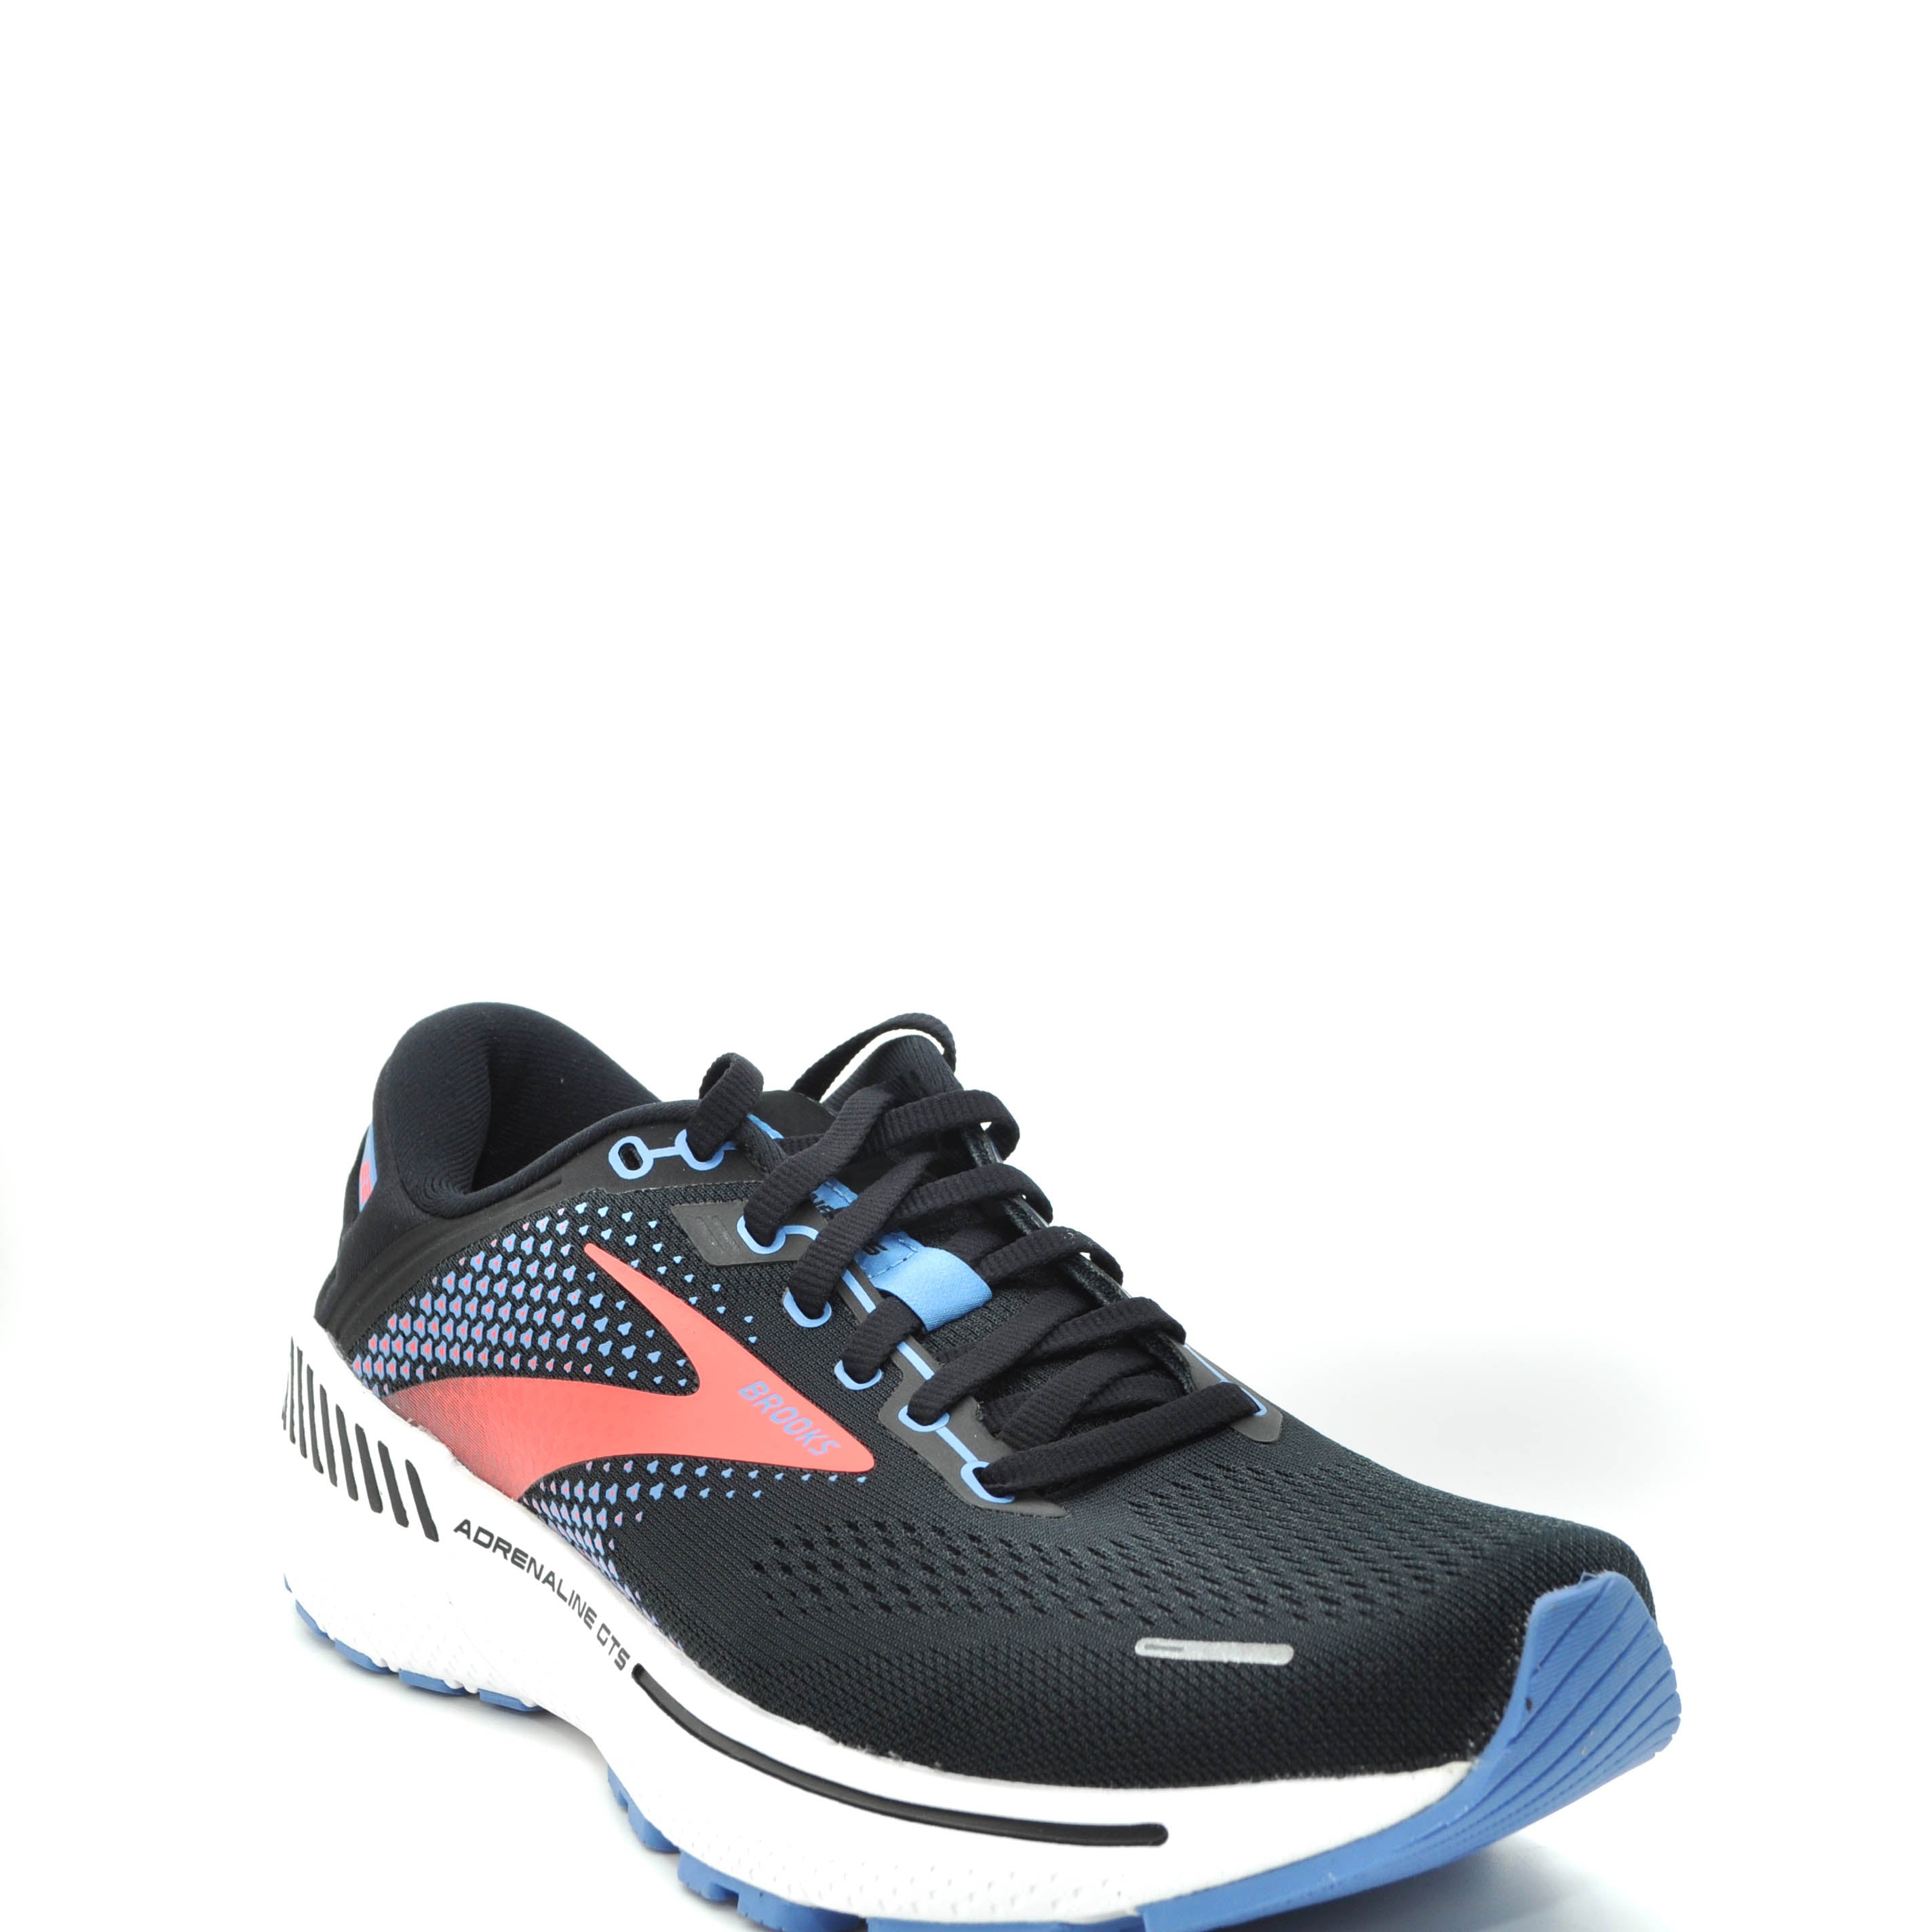 Brooks best walking shoes with arch support